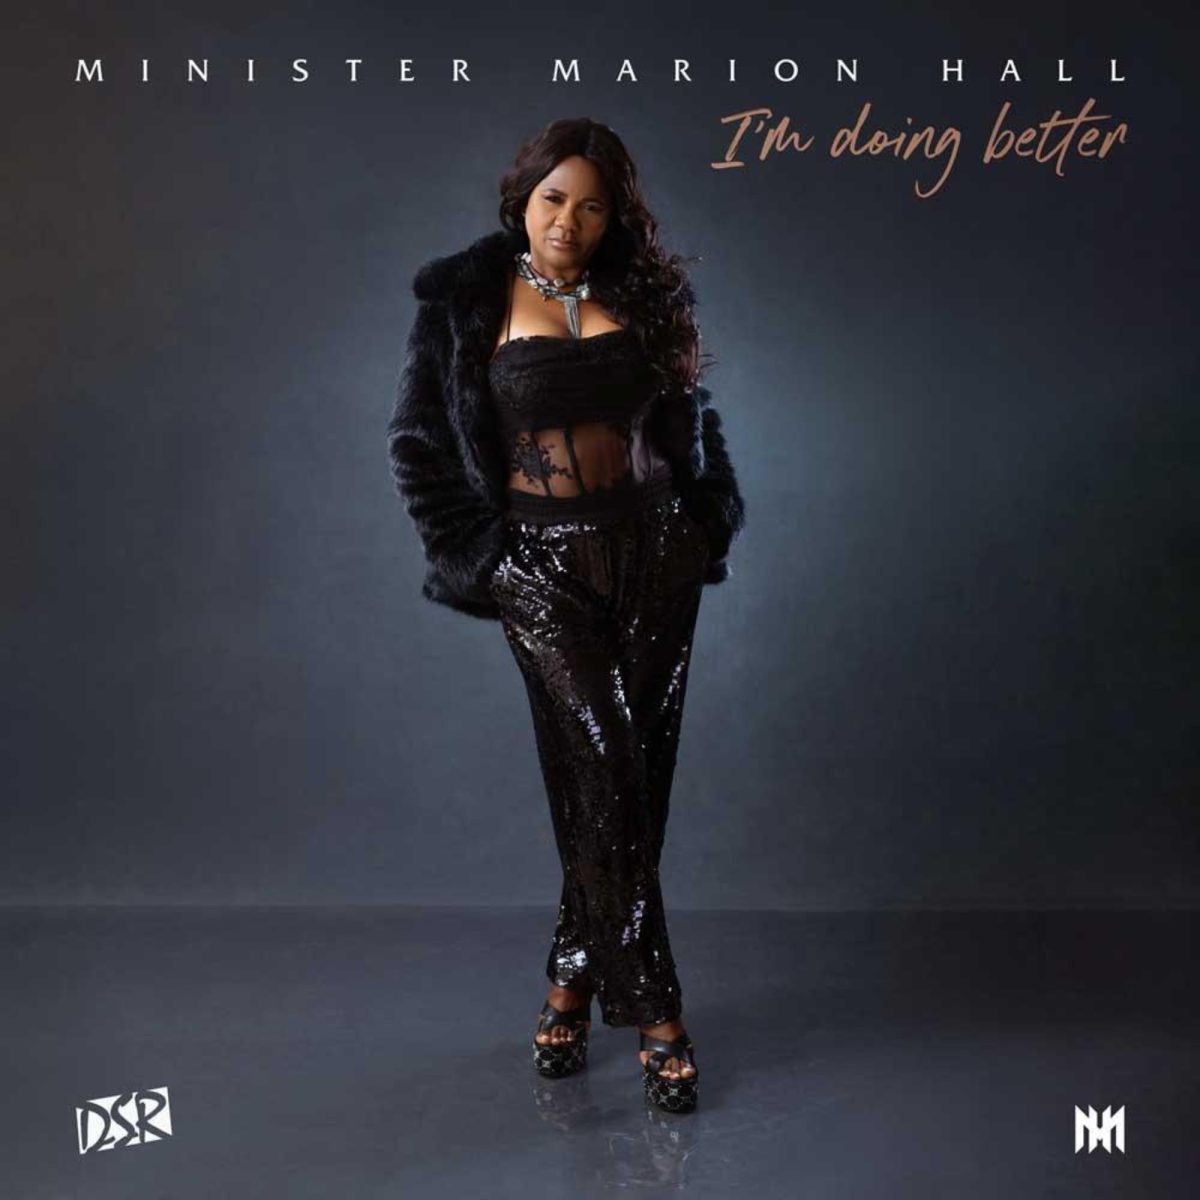 Minister Marion Hall Responds To Criticism Of New Song’s Cover Art Showing Her “God-Blessed Body”